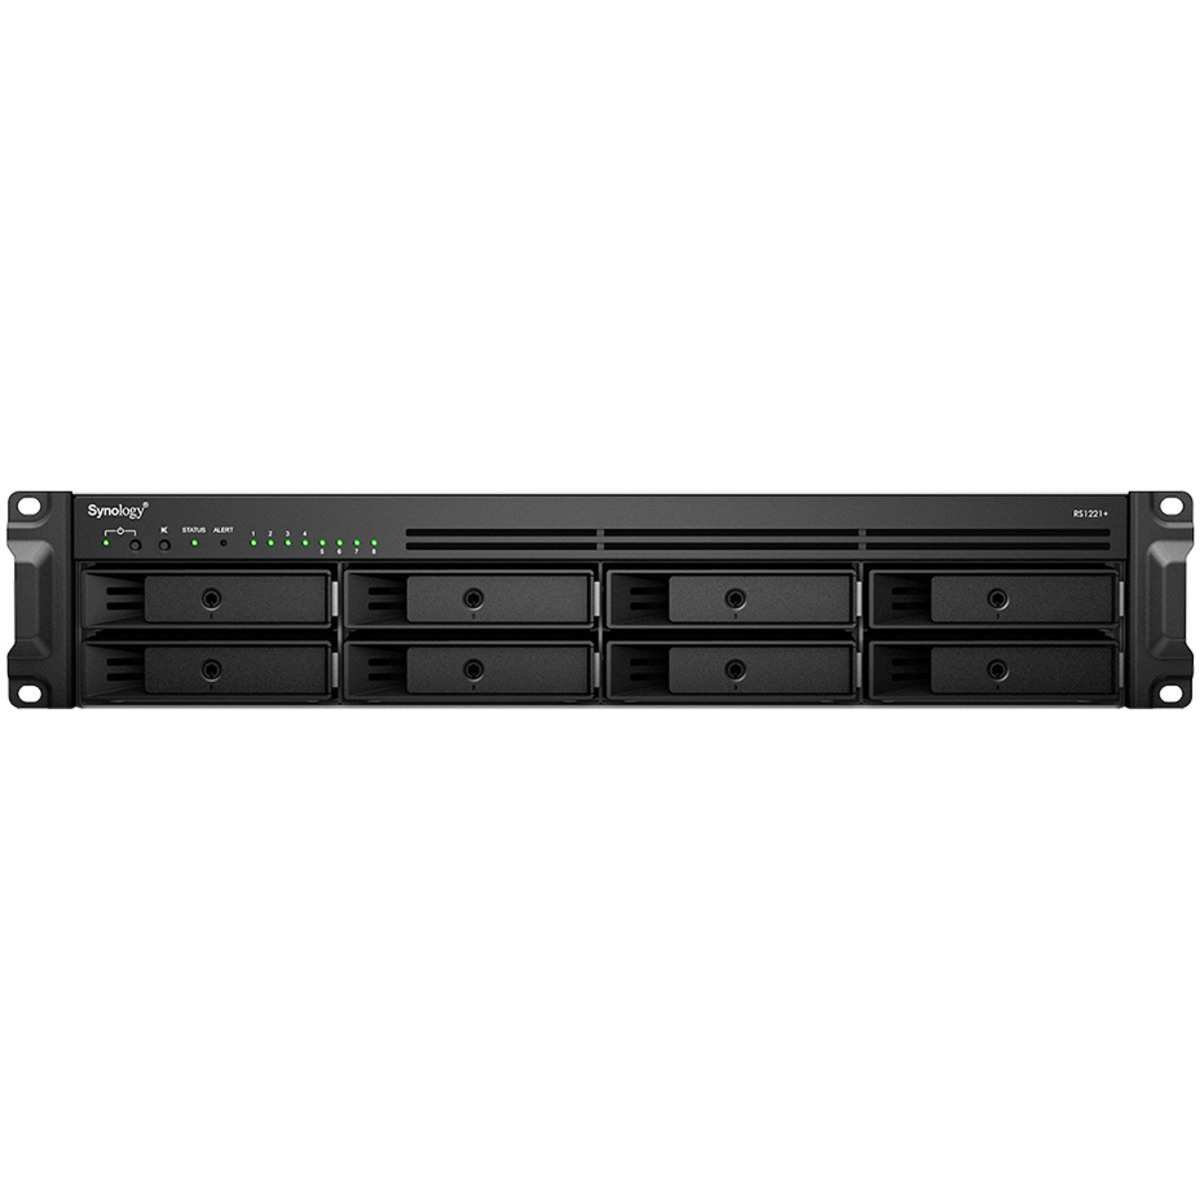 Synology RackStation RS1221RP+ 126tb 8-Bay RackMount Multimedia / Power User / Business NAS - Network Attached Storage Device 7x18tb Synology HAT5310 Series HAT5310-18T 3.5 7200rpm SATA 6Gb/s HDD ENTERPRISE Class Drives Installed - Burn-In Tested - FREE RAM UPGRADE RackStation RS1221RP+